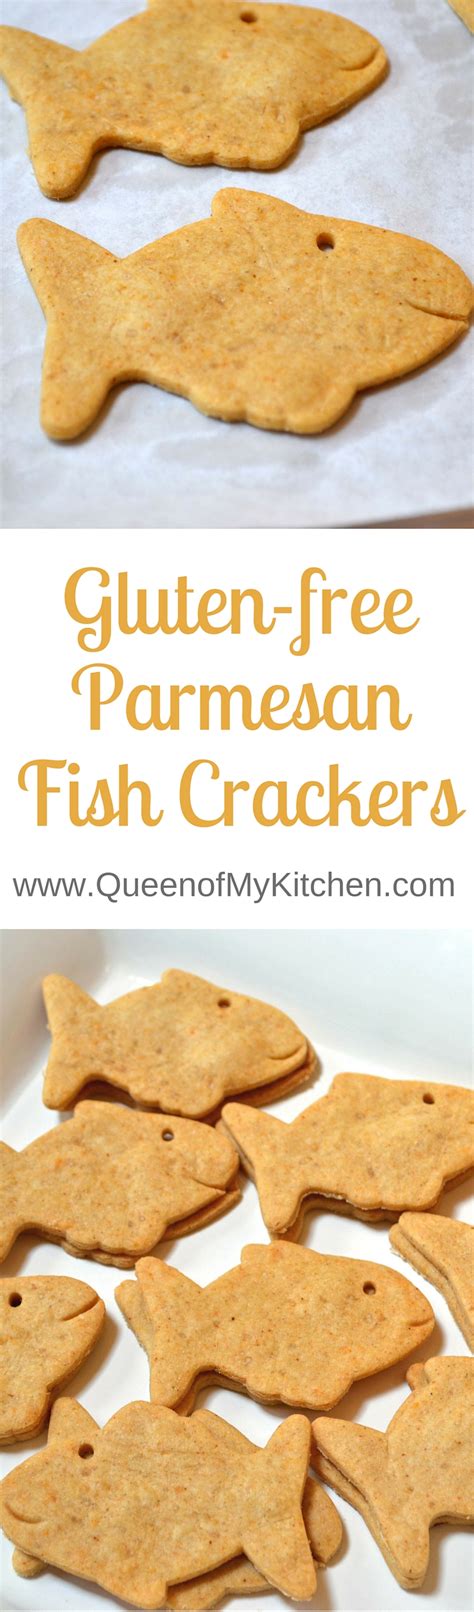 I am beyond getting excited about any new gf product. Gluten Free Parmesan Fish Crackers | Recipe | Fish ...